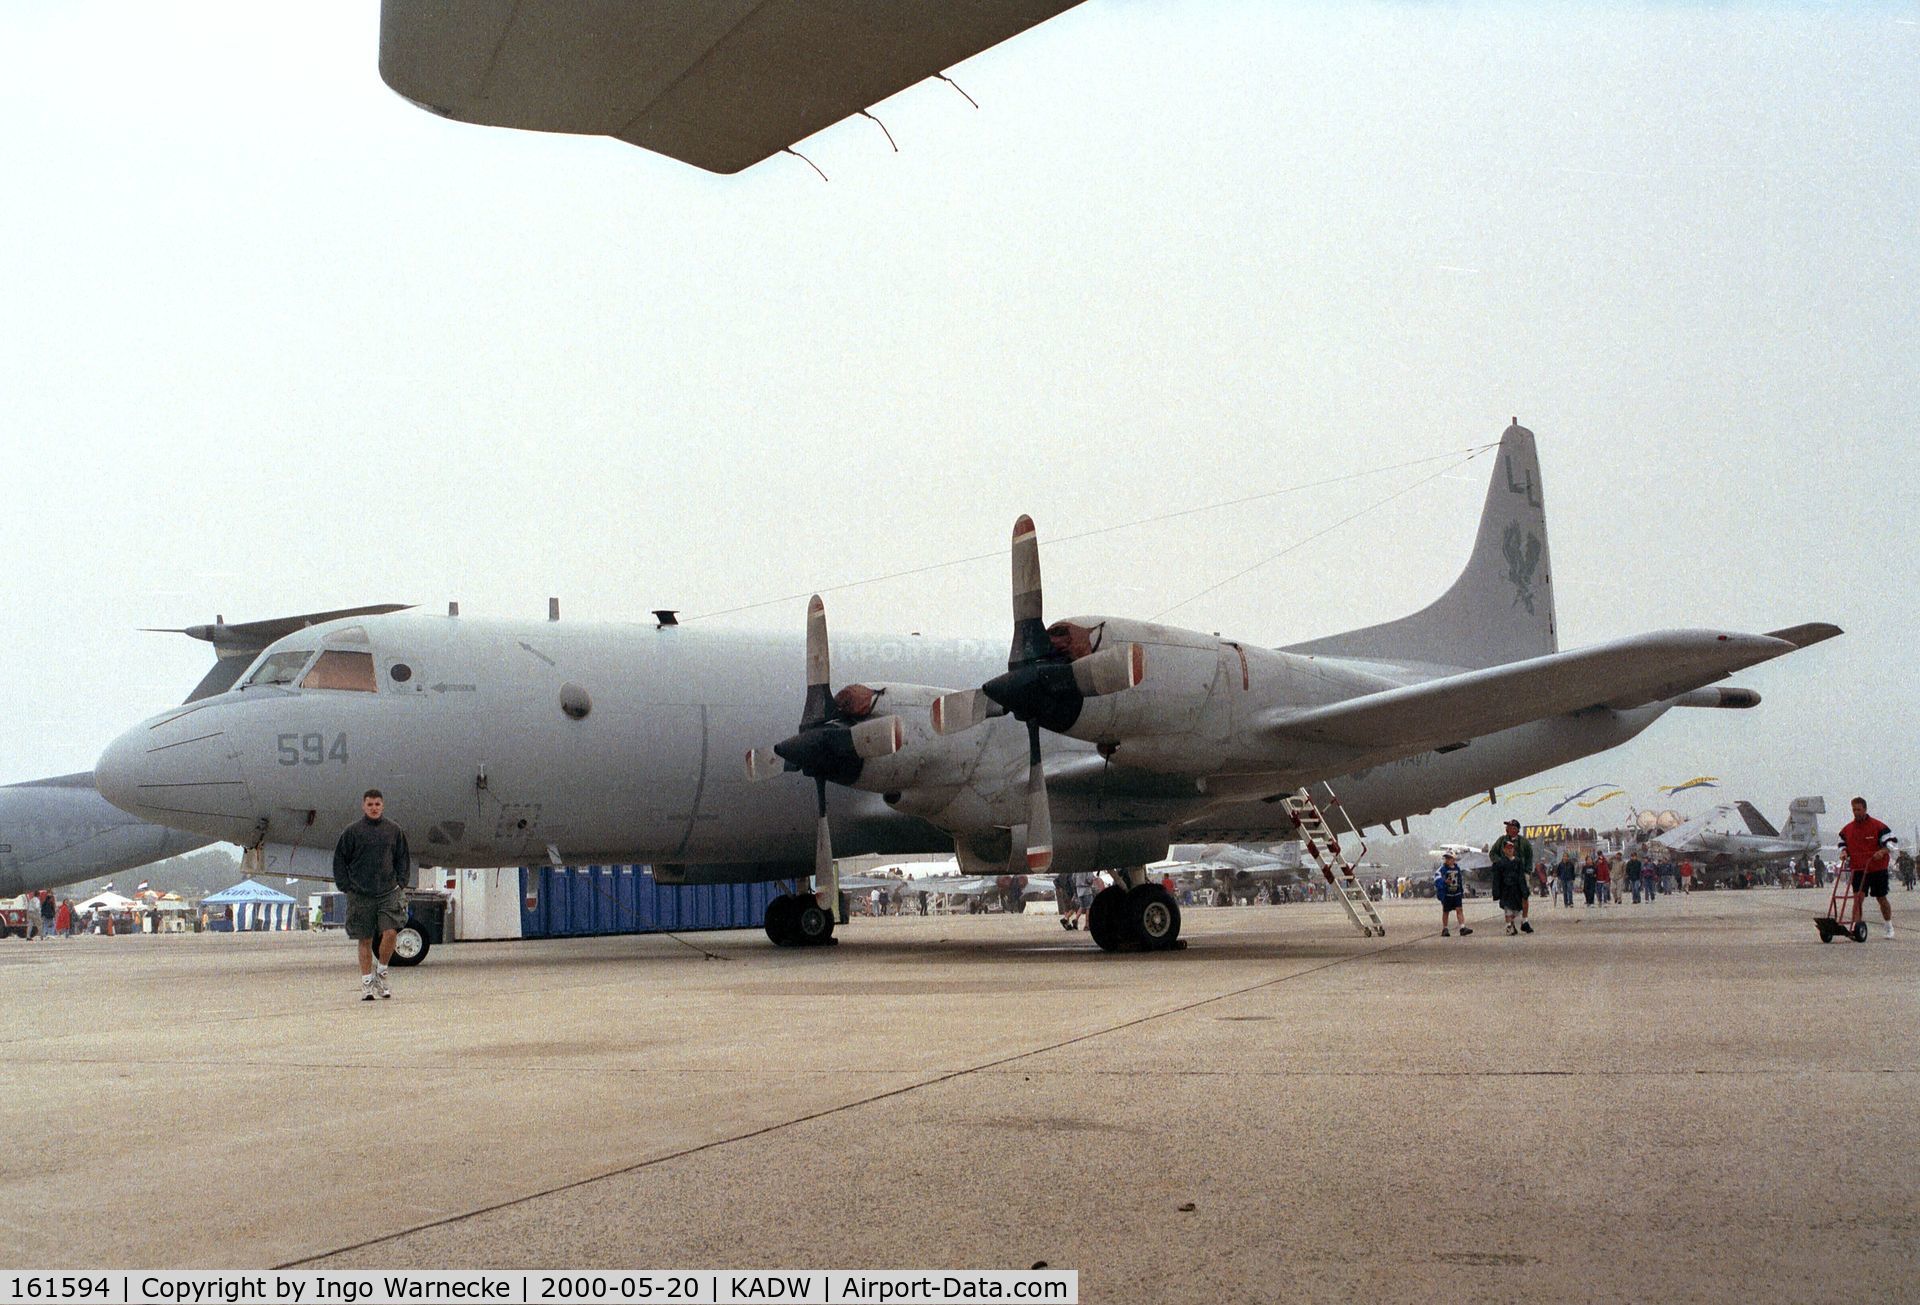 161594, 1984 Lockheed P-3C Orion C/N 285E-5768, Lockheed P-3C Orion of the US Navy at Andrews AFB during Armed Forces Day